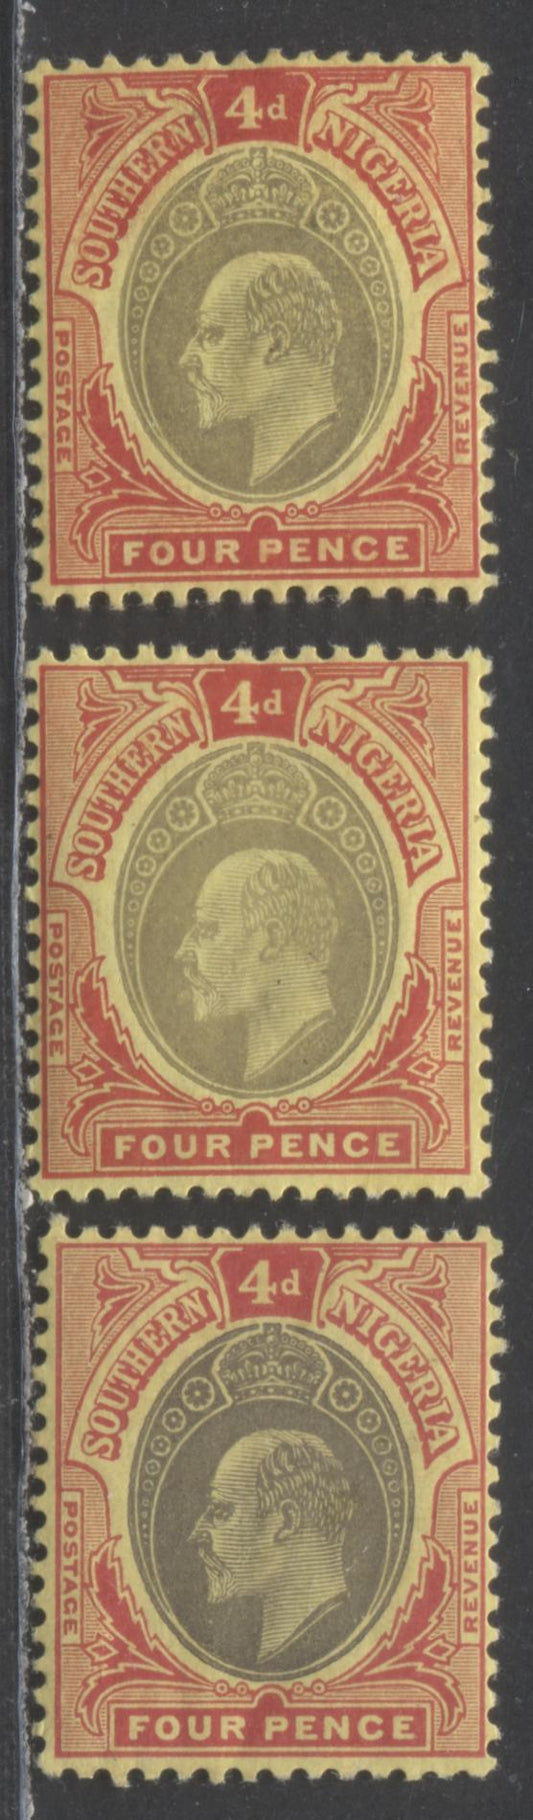 Lot 95 Southern Nigeria SC#37 4d Scarlet/Pale Gray, Gray & Deep Gray On Yellow 1907-1910 Universal Color Edward VII Keyplate Issue, 3 Printings, Multiple Crown CA Wmk, 3 VFOG Singles, 2022 Scott Classic Cat. $7.5 USD